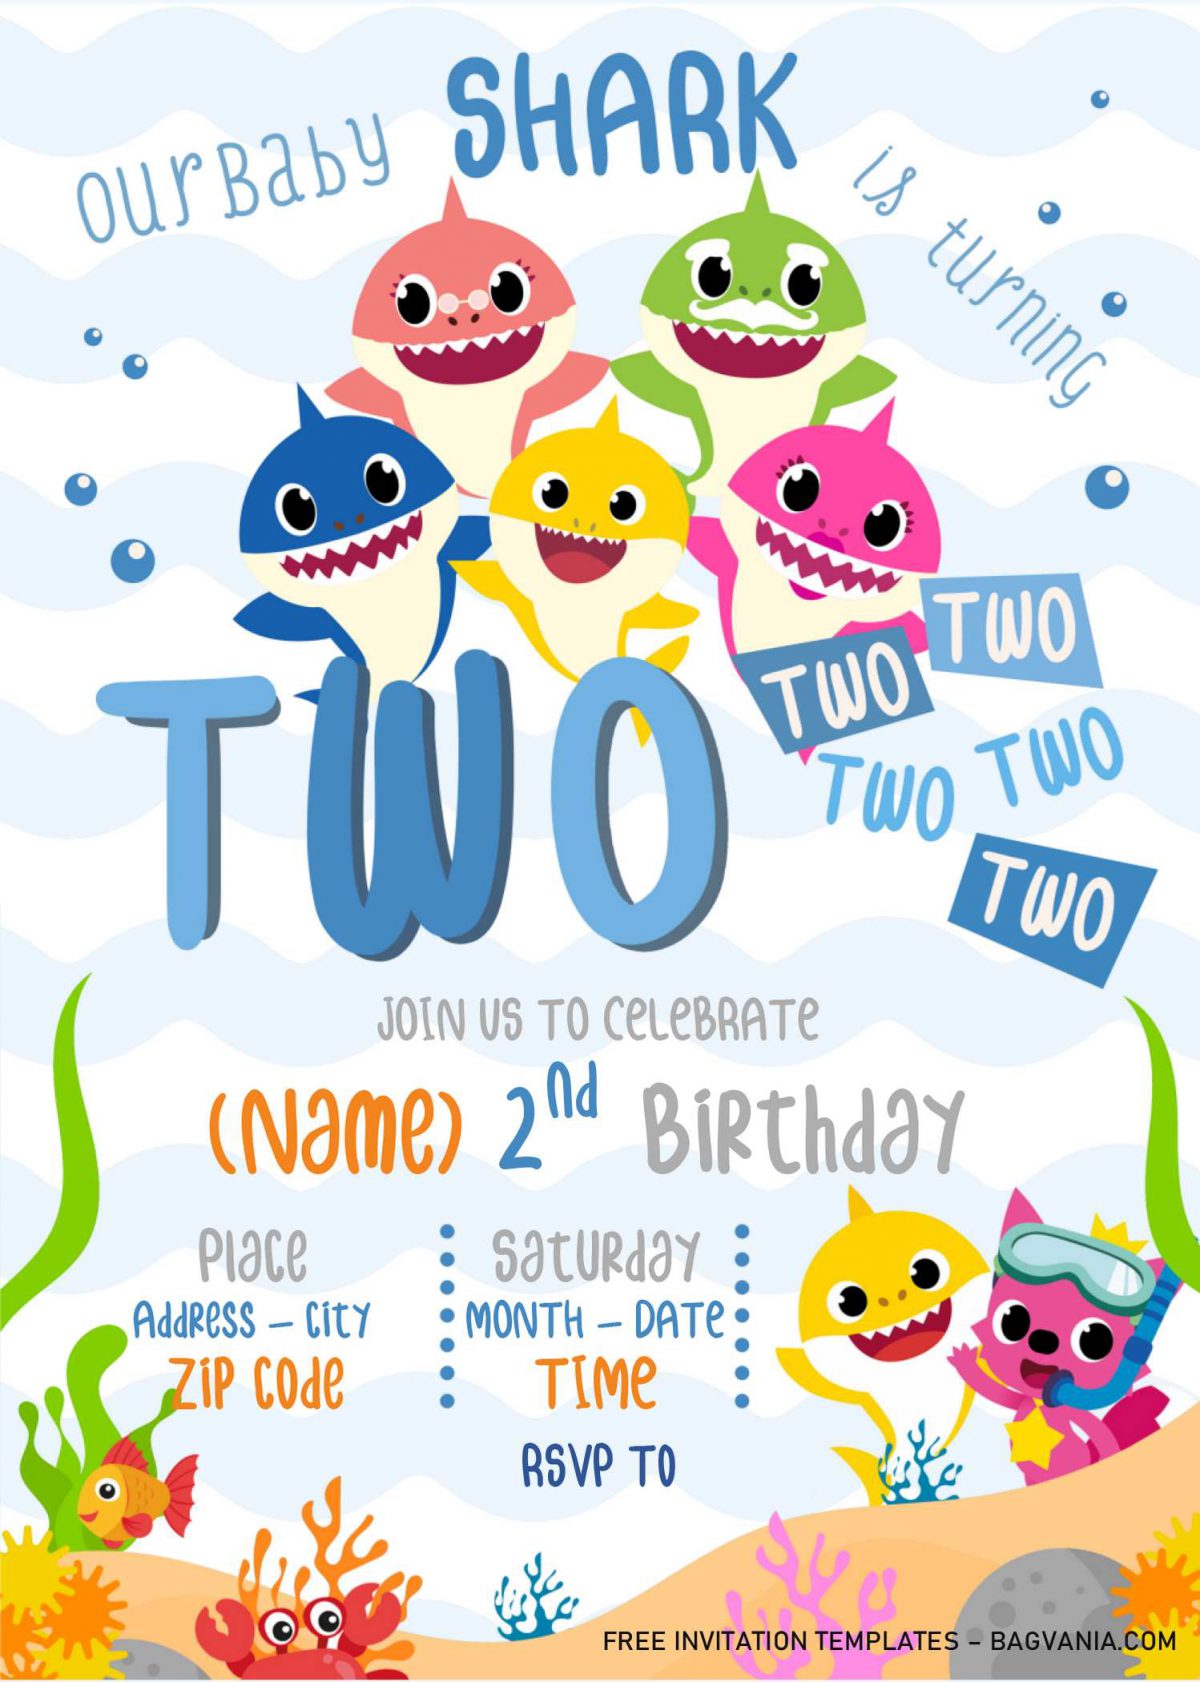 Baby Shark Birthday Invitation Templates - Editable With Microsoft Word and has blue wave background